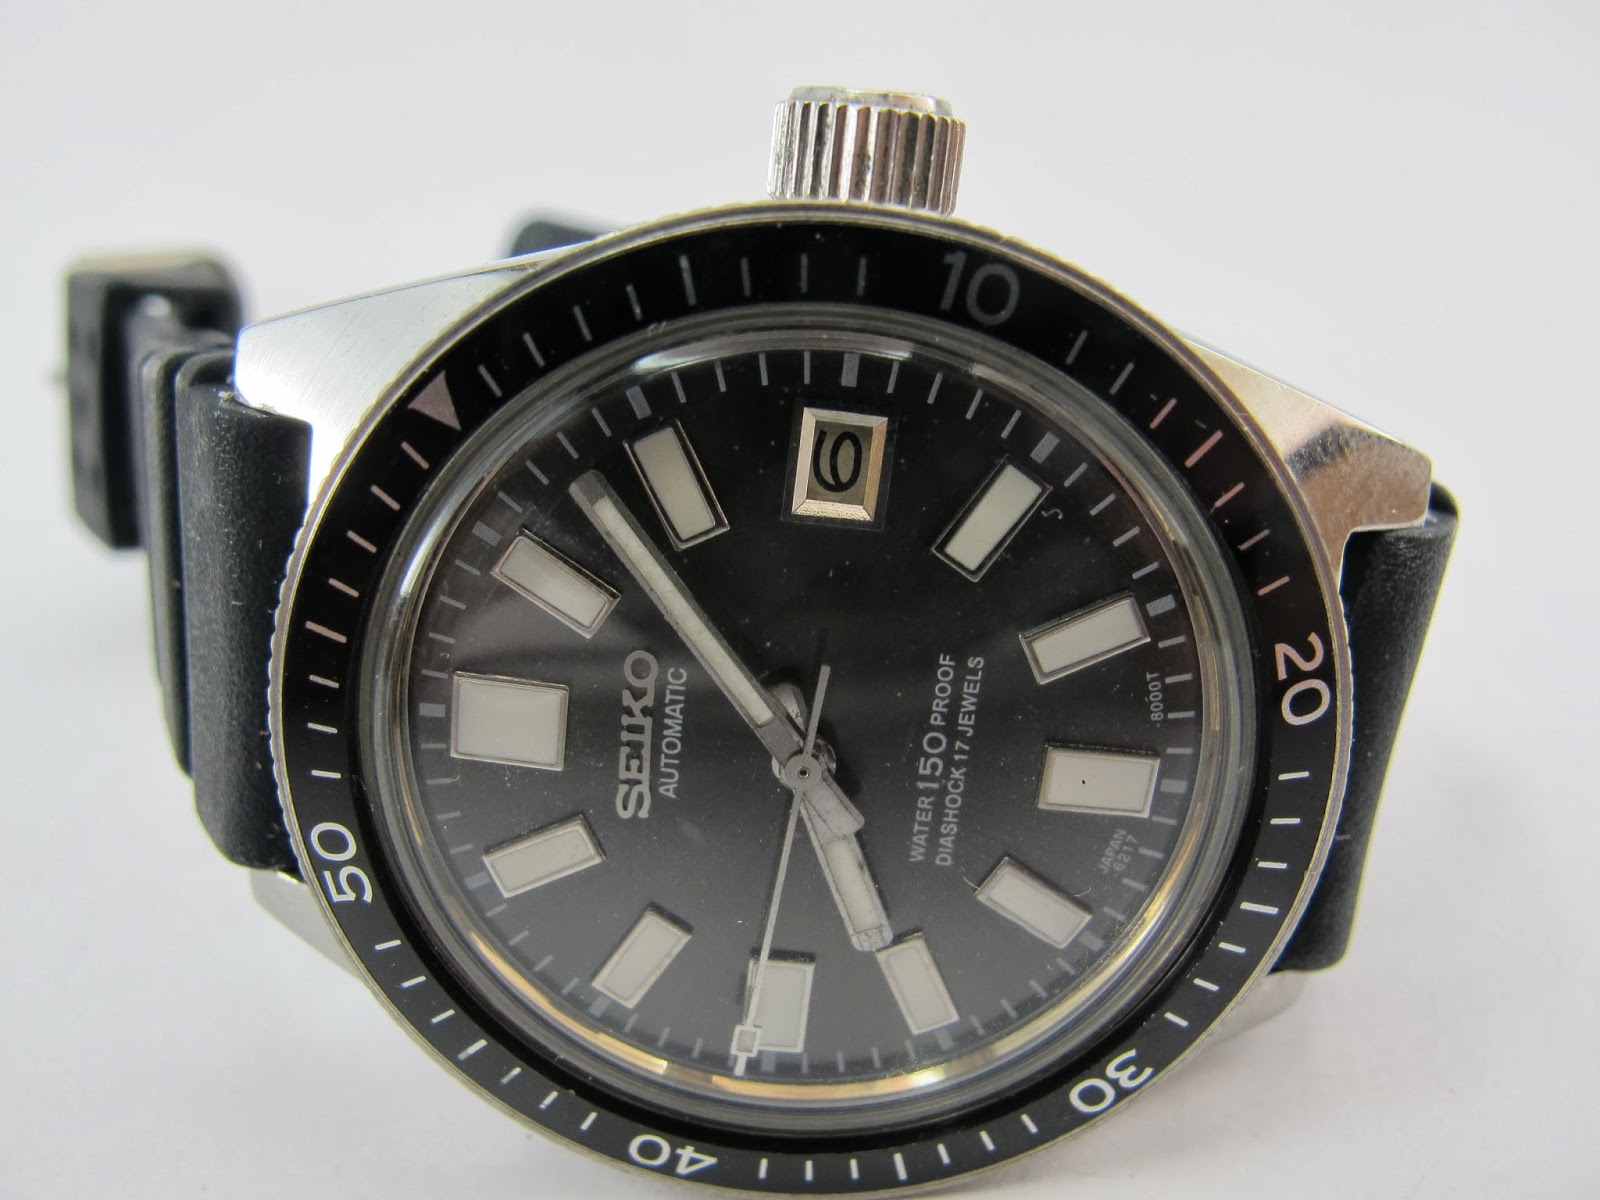 watchopenia: Seiko diver 6217-8001: For the first time...